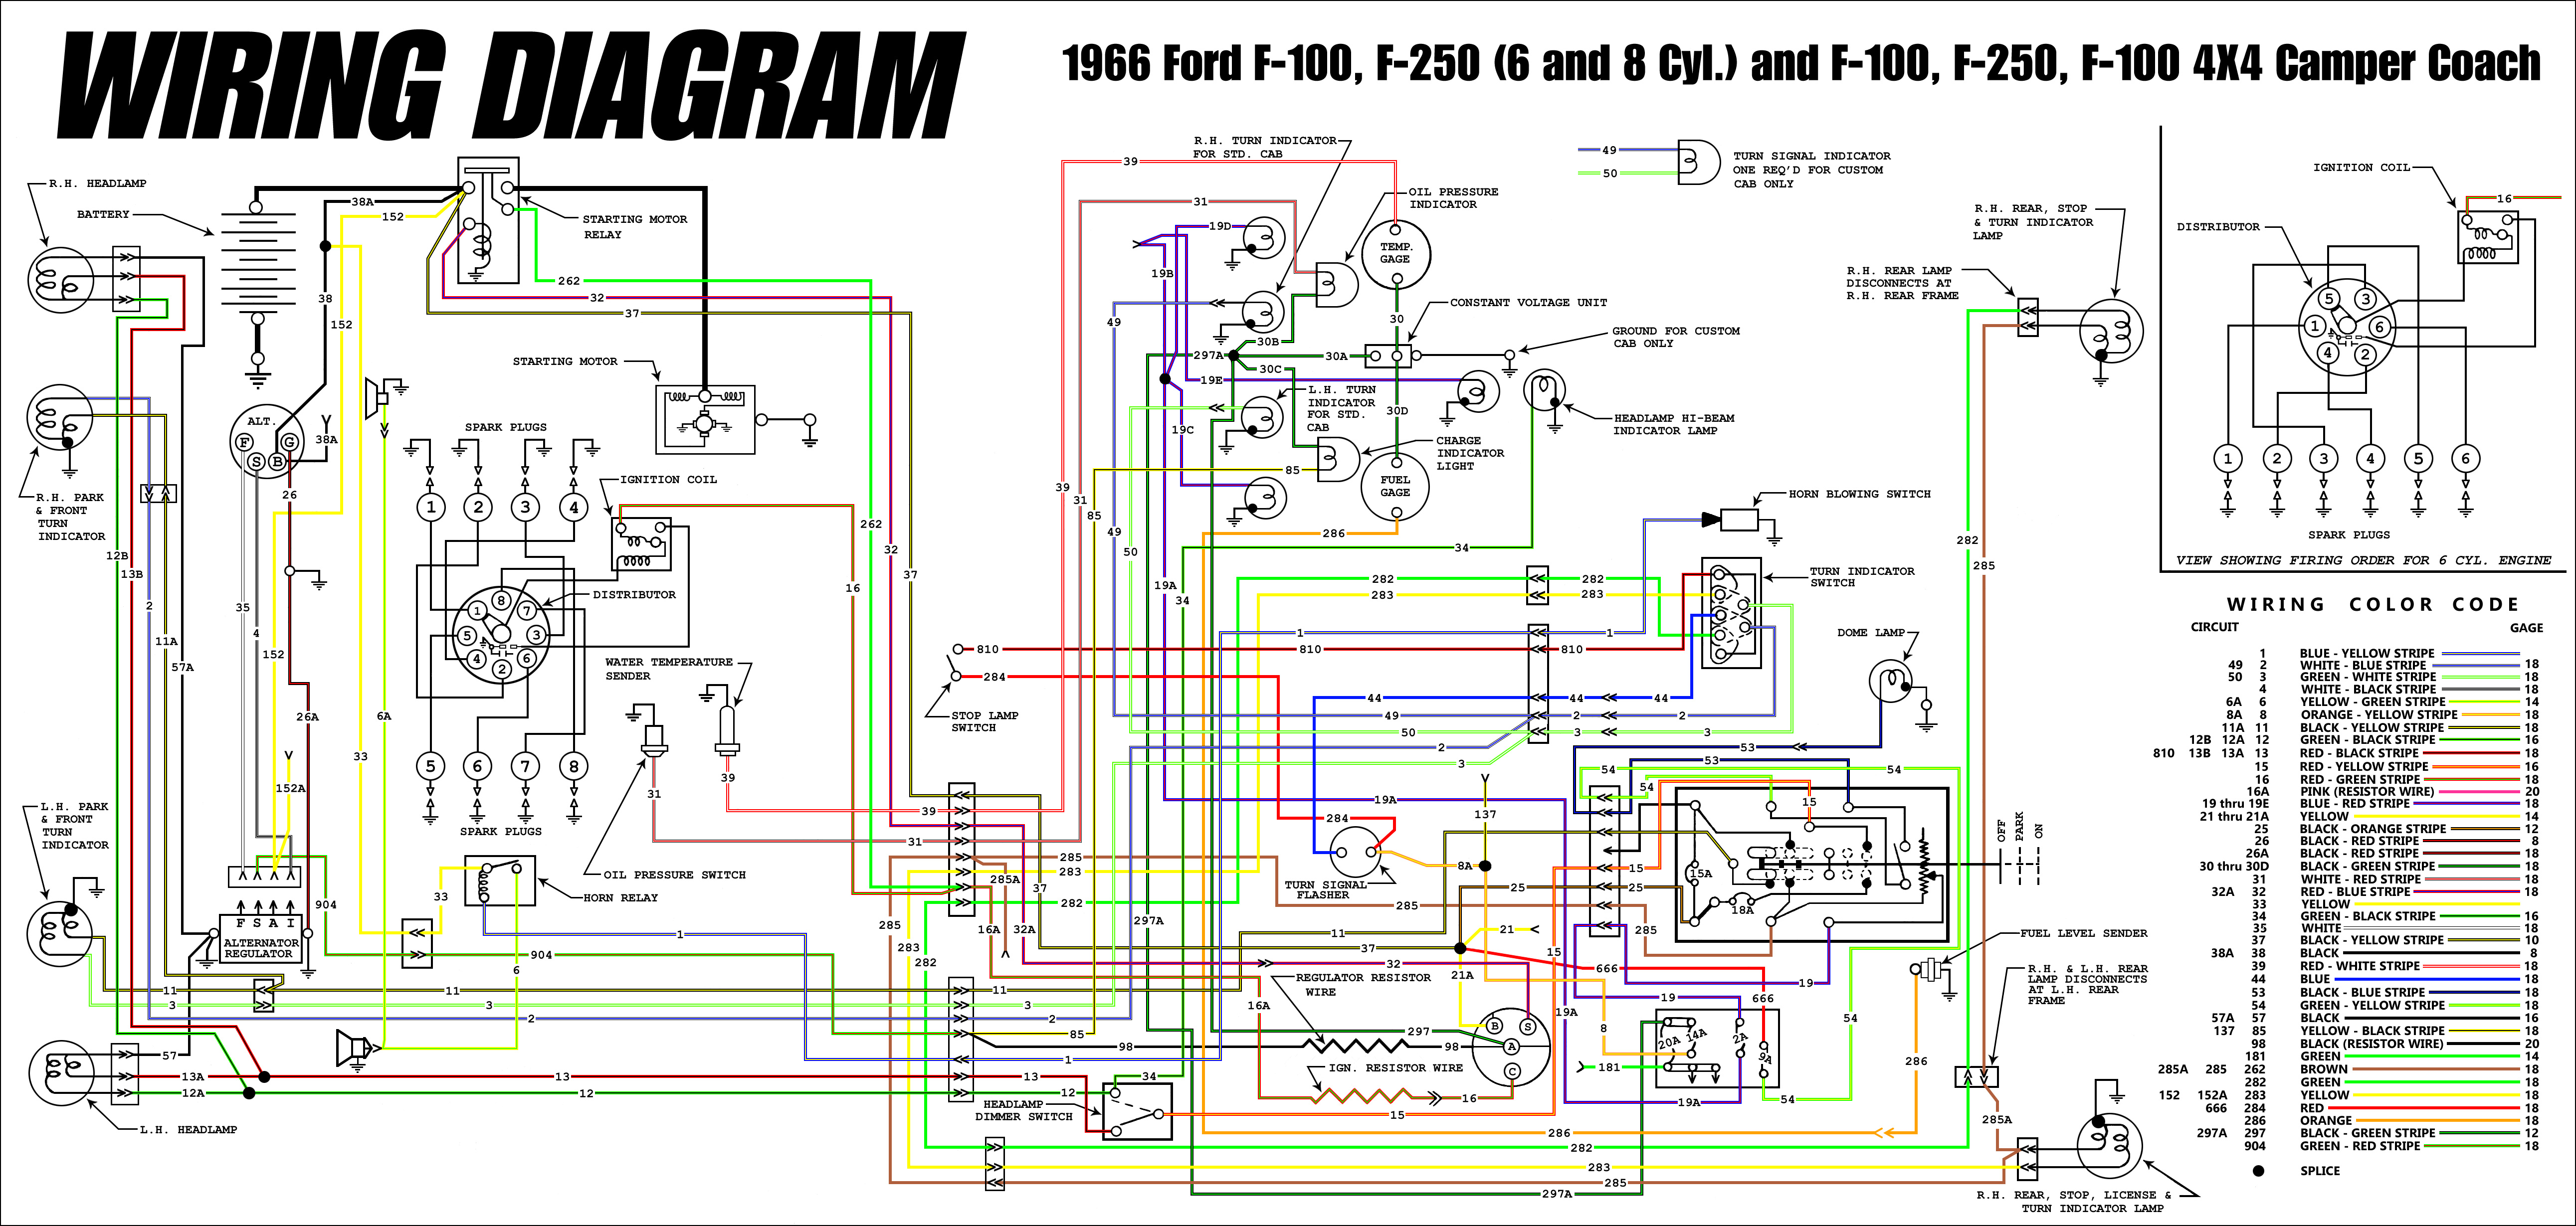 1966 F100 Ignition Switch Wiring Diagram from www.fordification.info